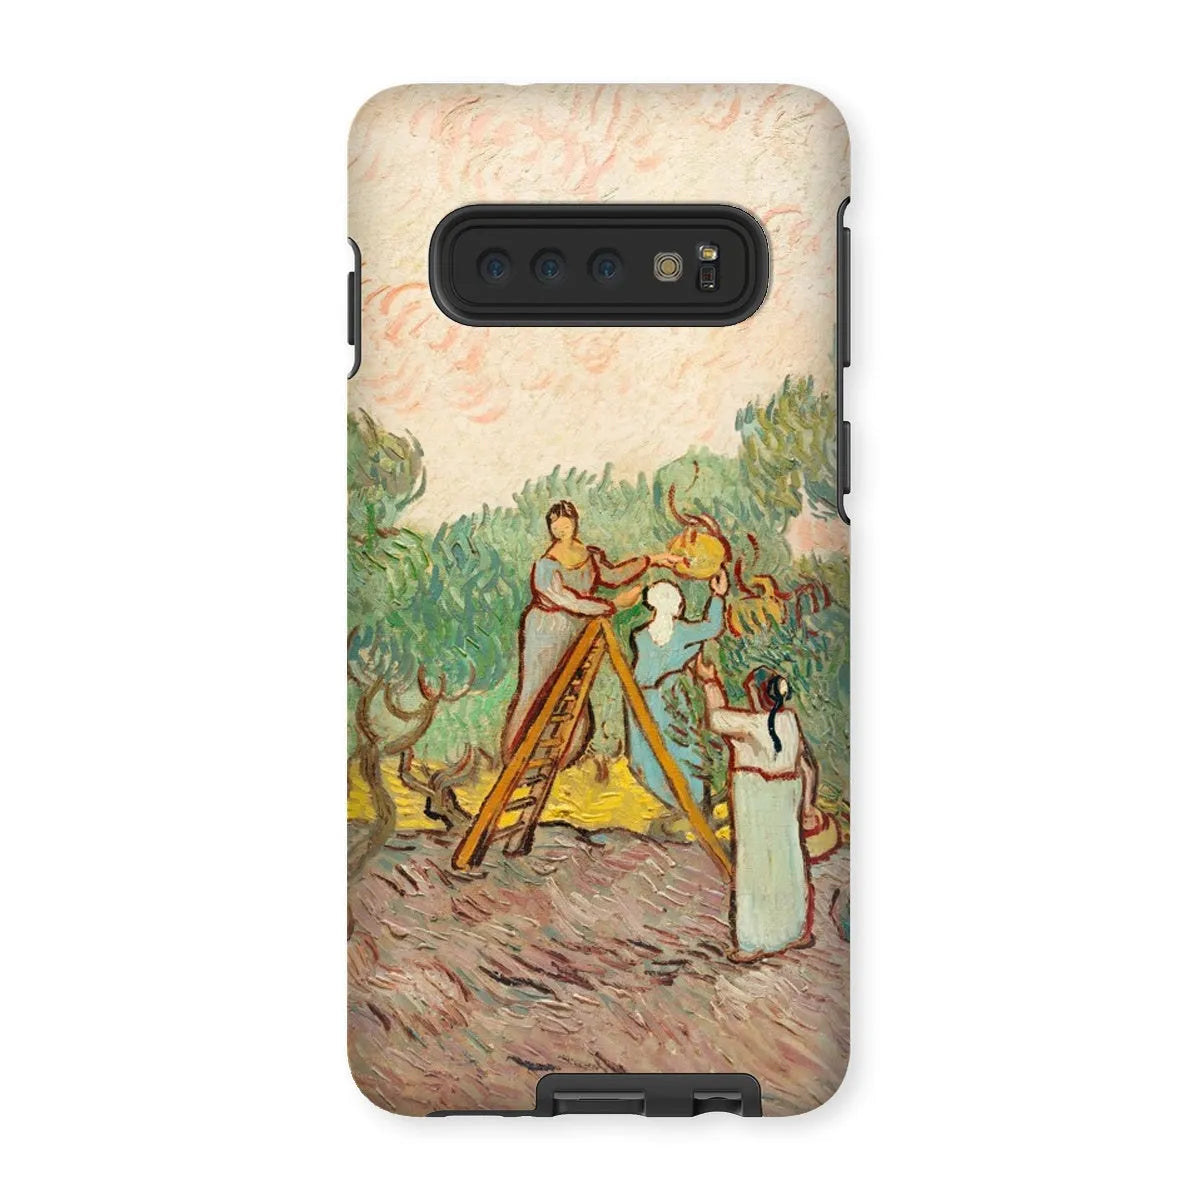 Women Picking Olives - Art Phone Case - Vincent Van Gogh - Samsung Galaxy S10 / Matte - Mobile Phone Cases - Aesthetic